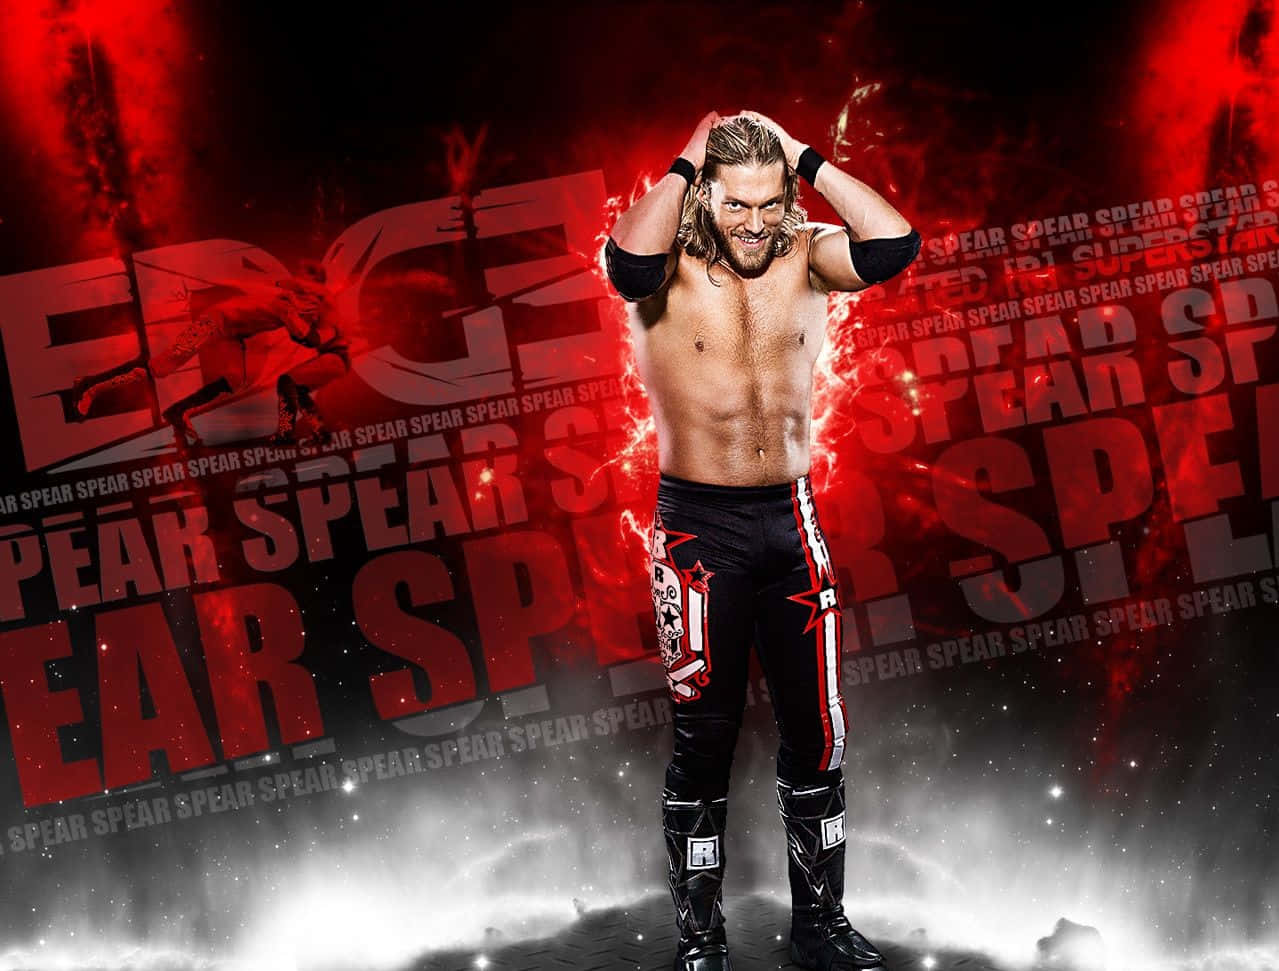 Adampage Red Spear Can Be Translated To Italian As 